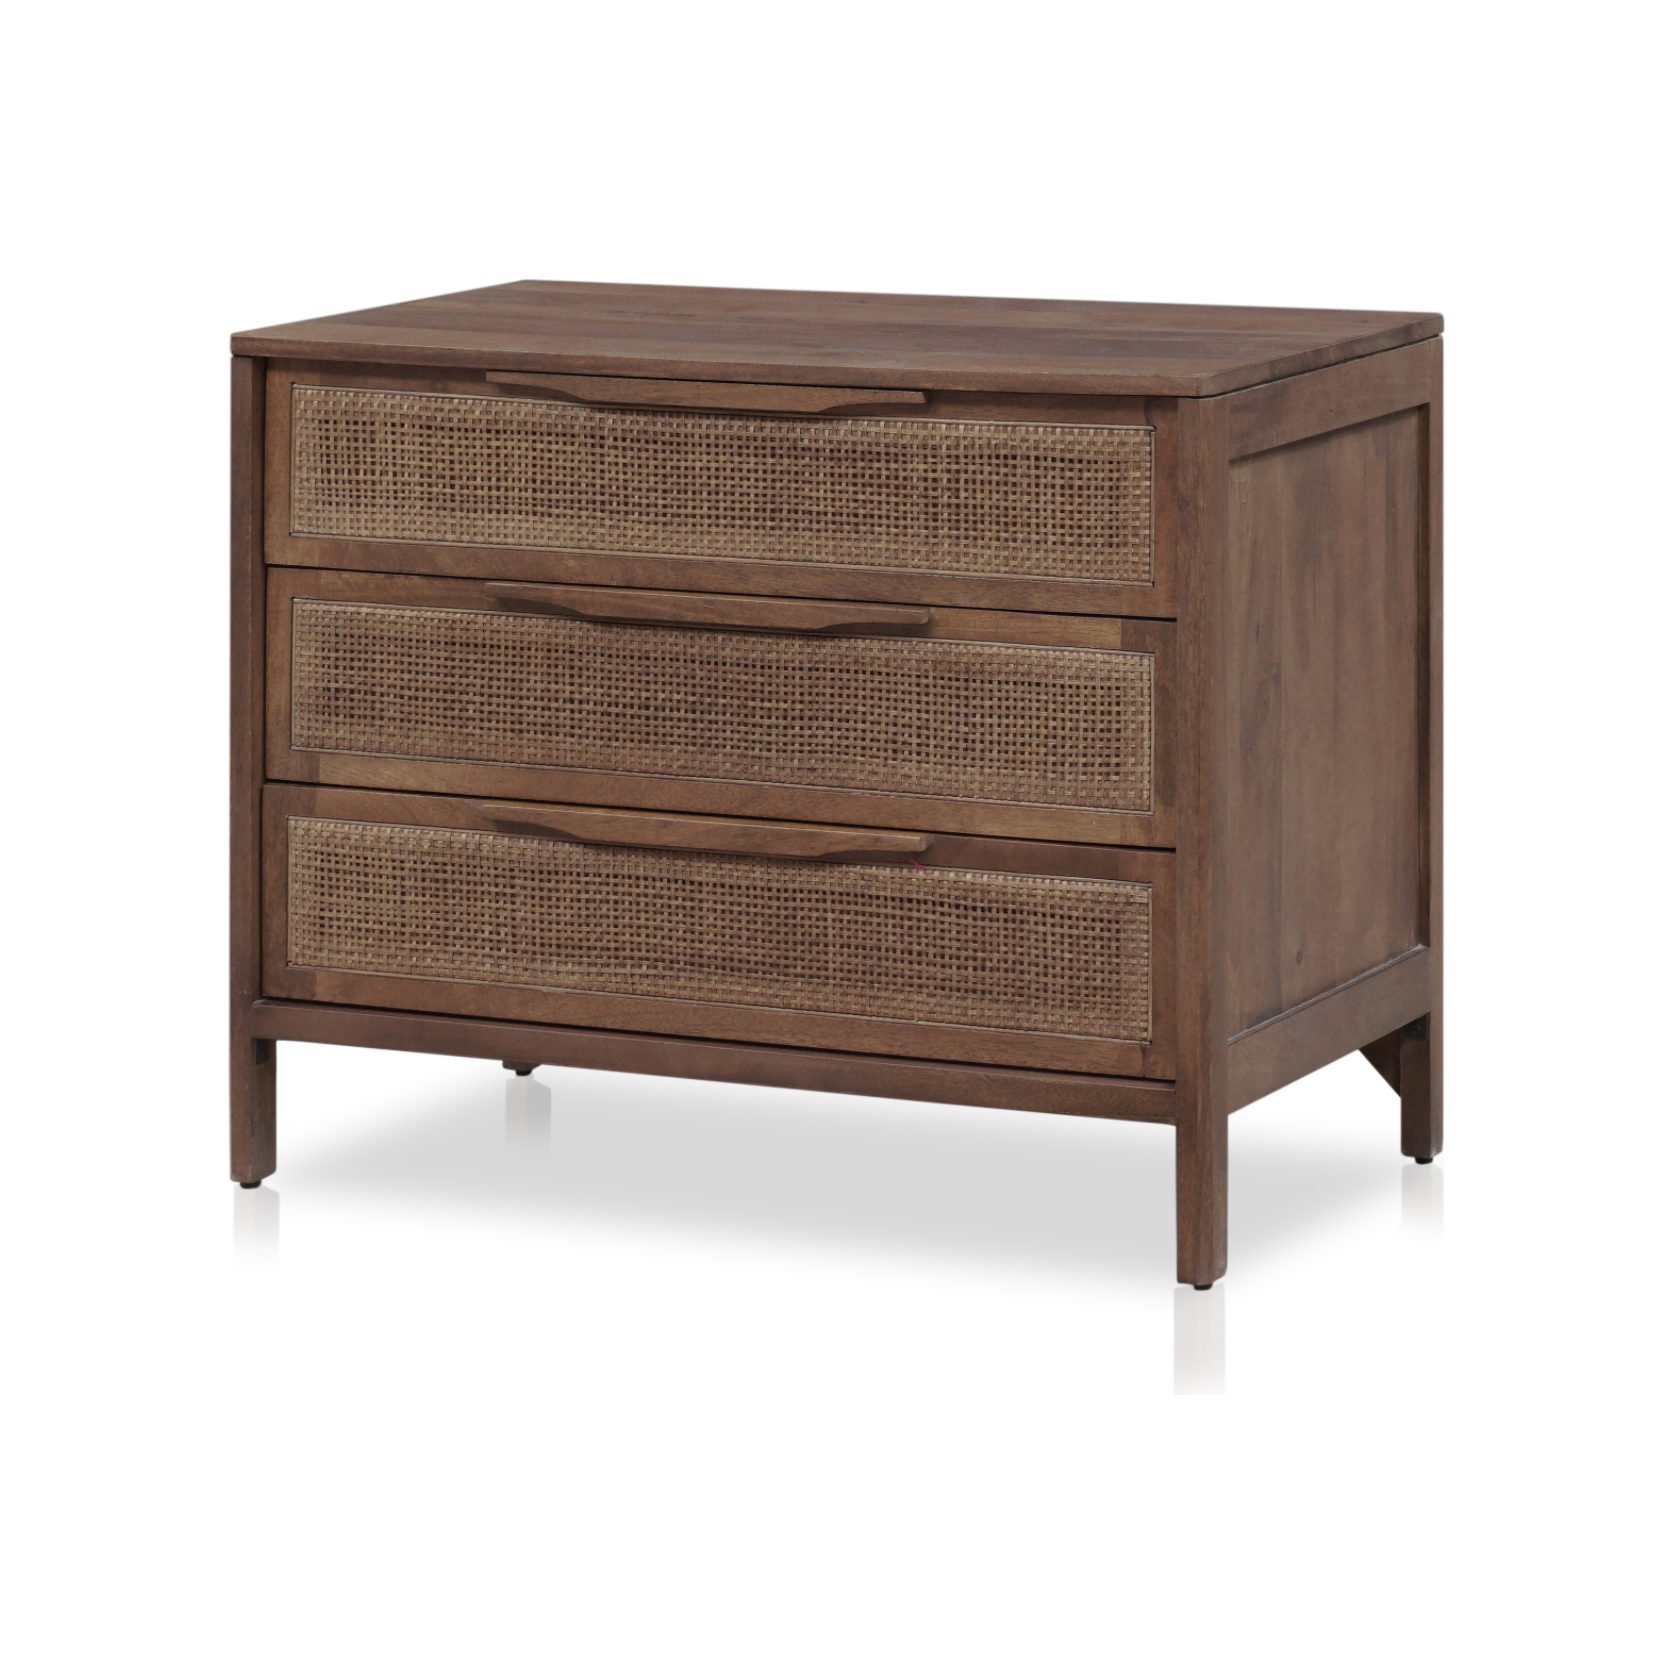 Brown wash  mango frames inset woven cane, for a light, textural look with organic allure. Three spacious drawers provide plenty of closed storage. Amethyst Home provides interior design, new construction, custom furniture and area rugs in the Los Angeles metro area